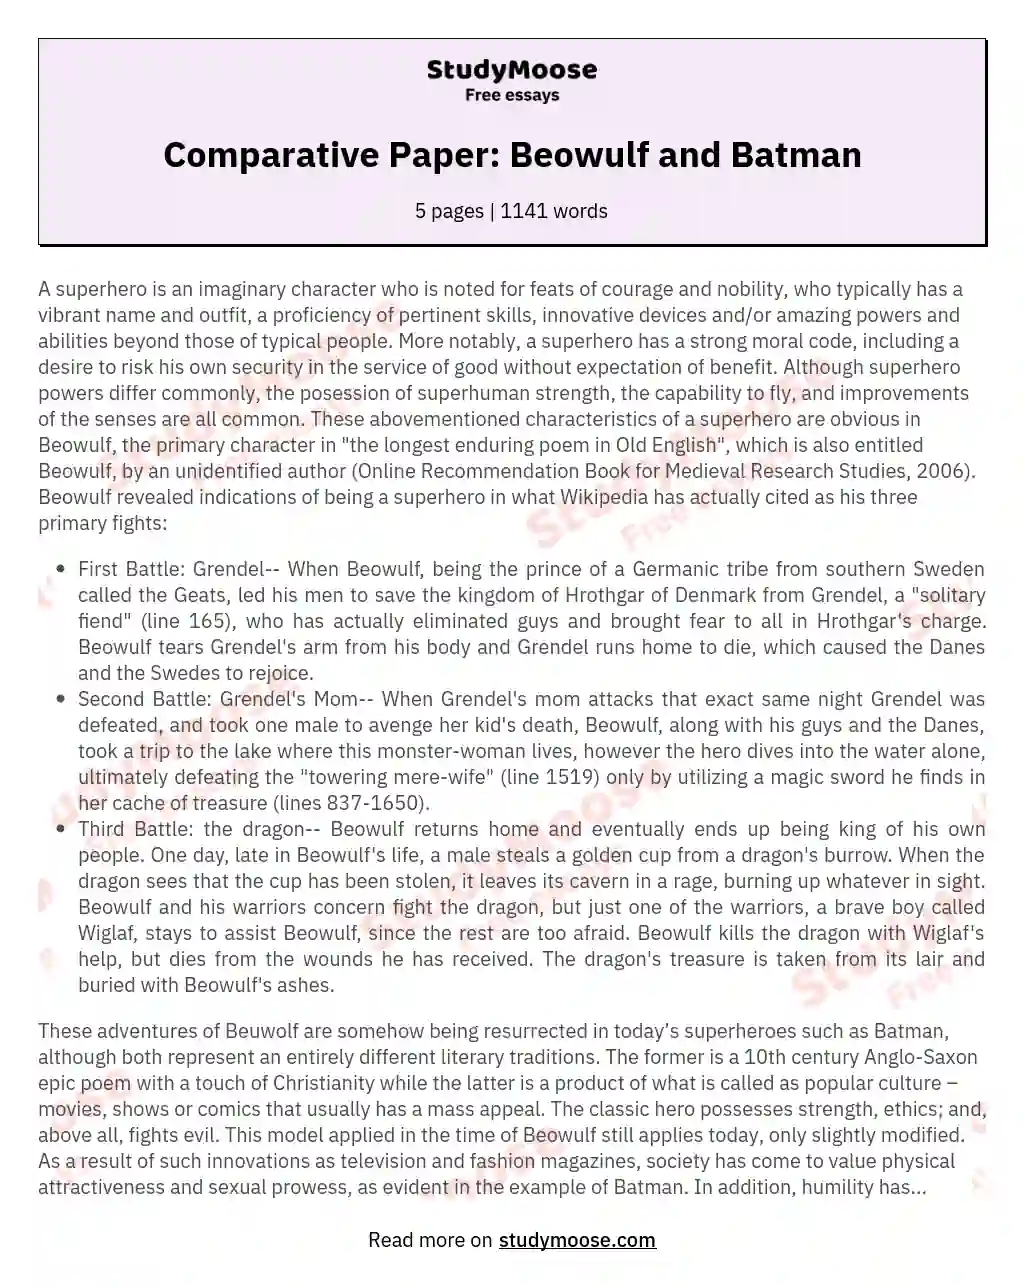 Comparative Paper: Beowulf and Batman essay